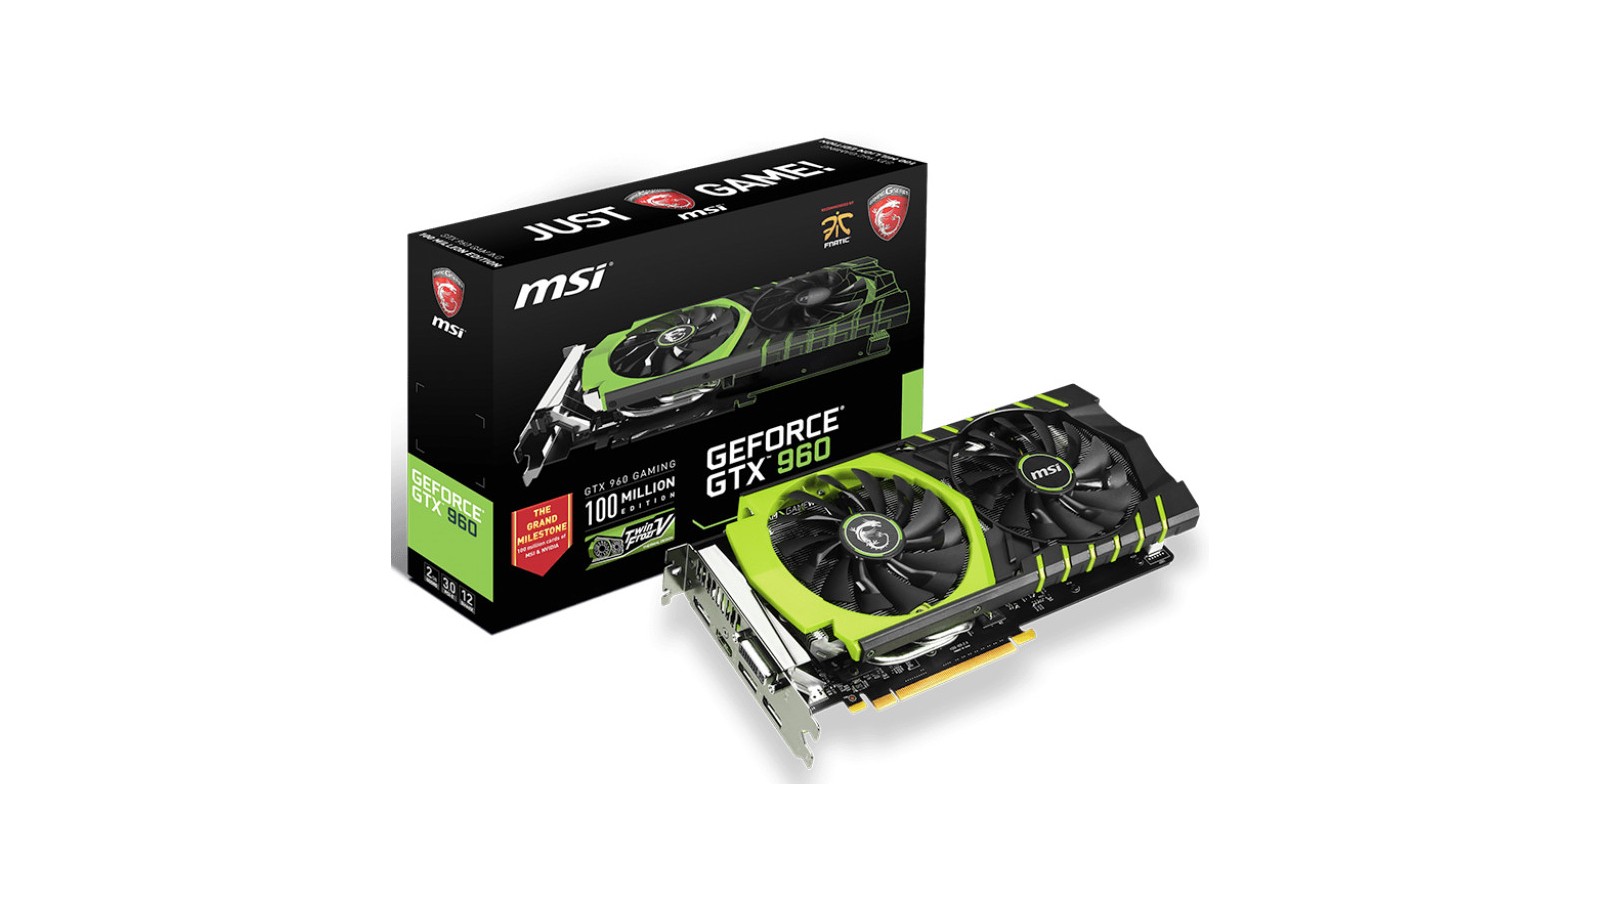 Msi Intros Gtx 960 And 970 Limited Edition Graphics Cards To Celebrate 100 Million Sales